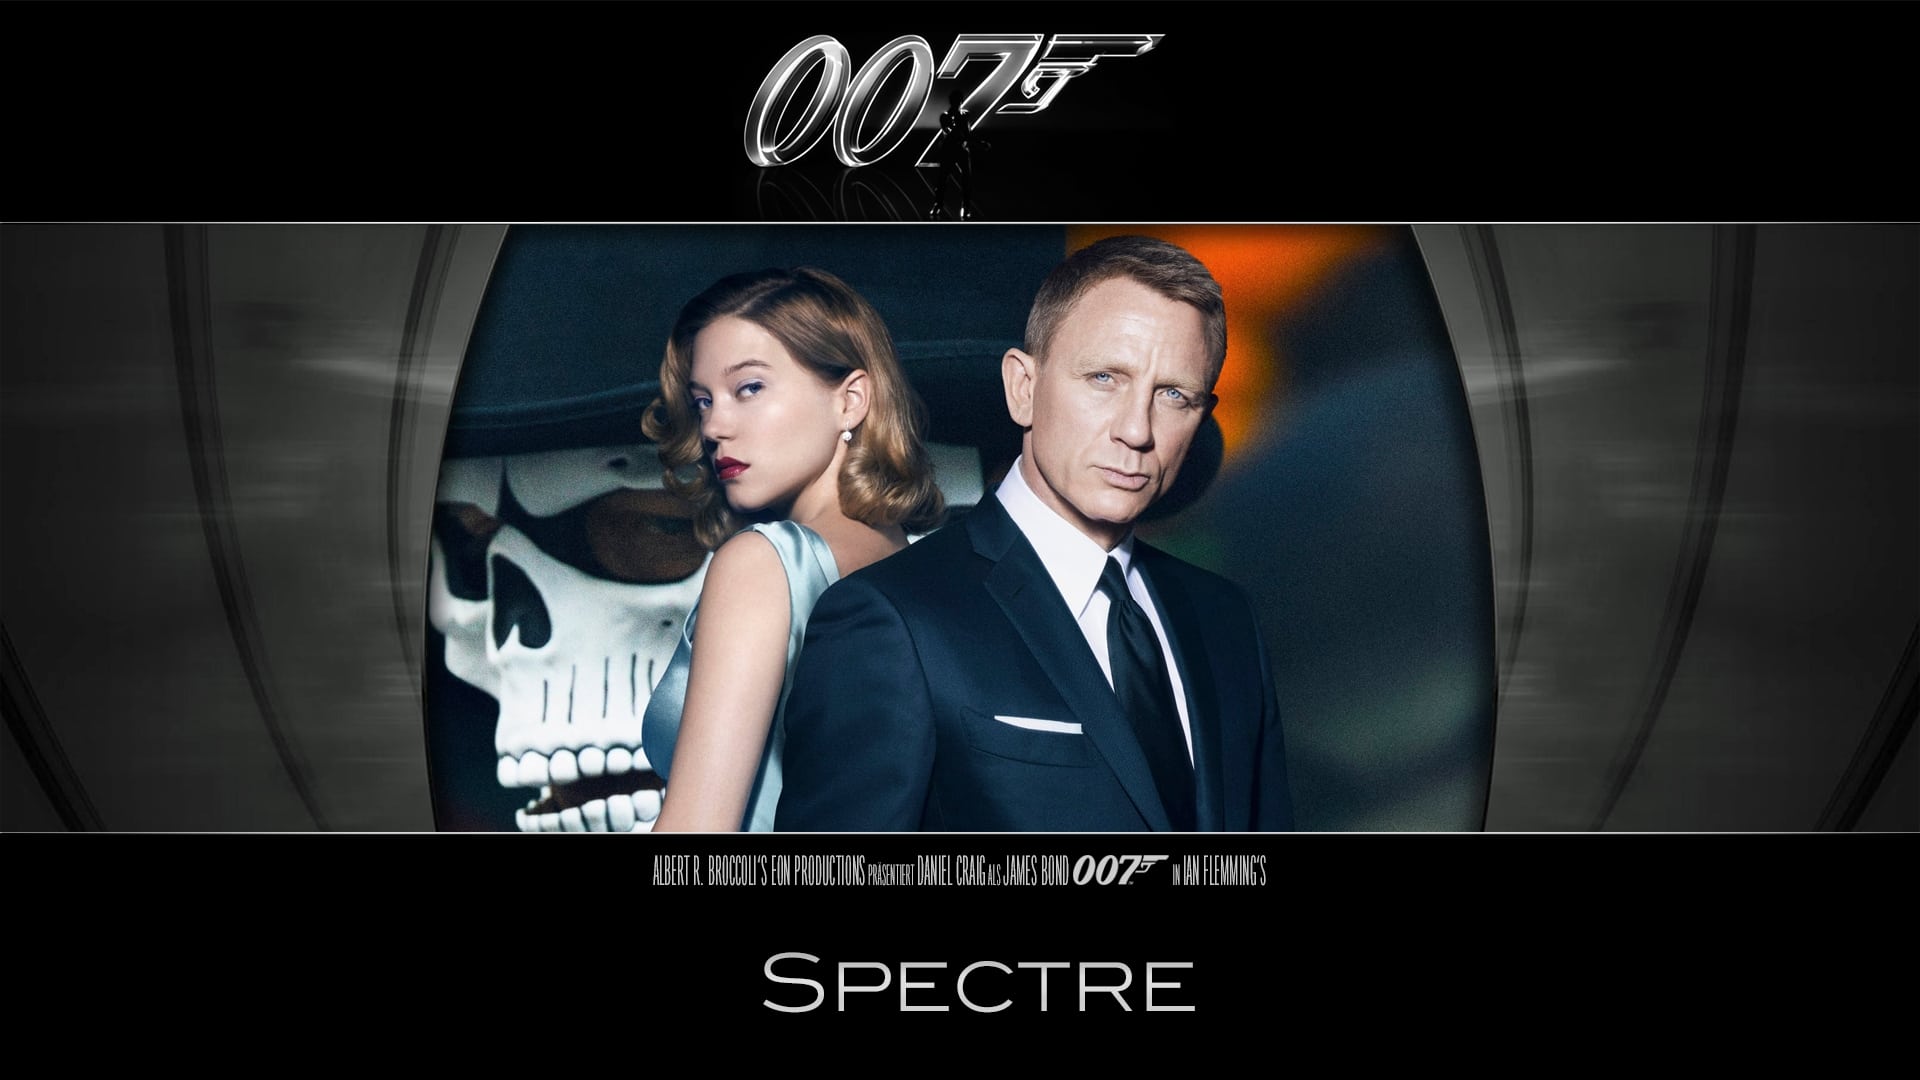 Is Spectre on HBO Max?